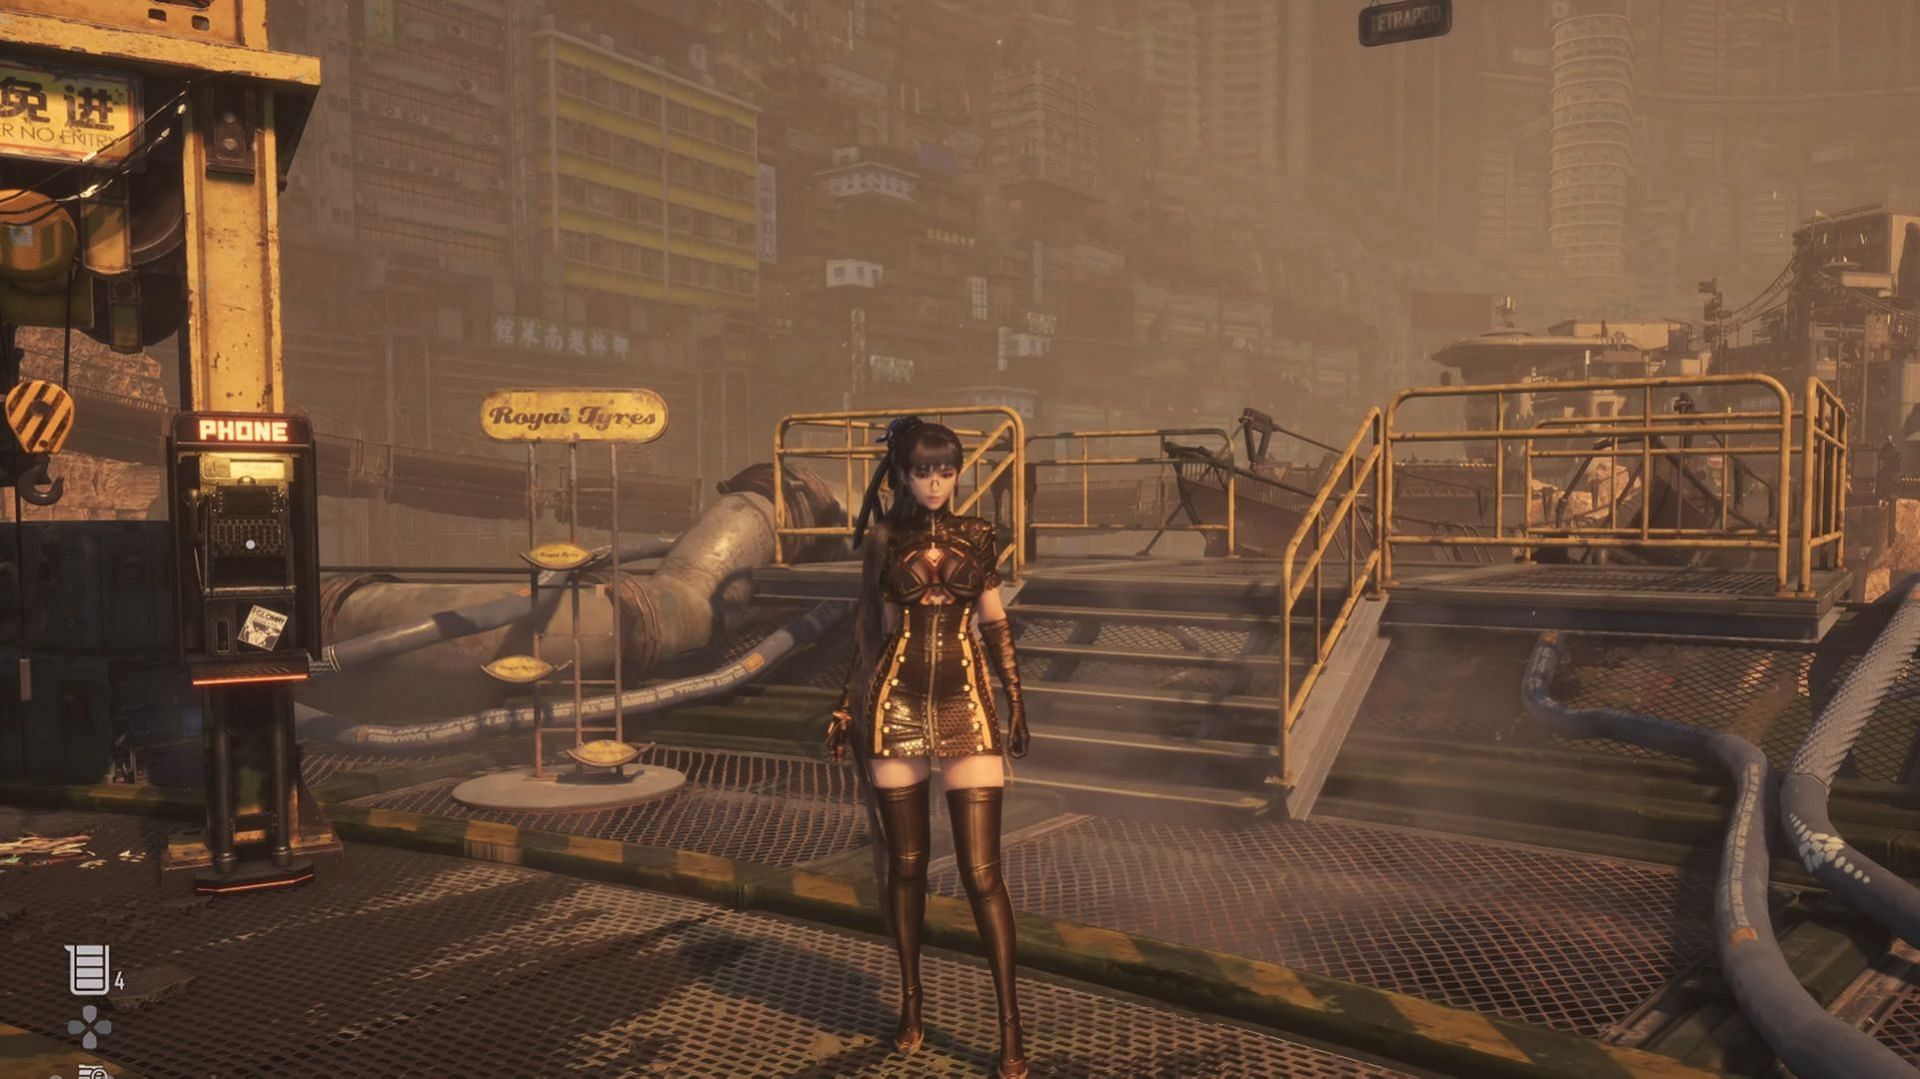 Eve near the Payphone in Stellar Blade (Image via Sony Interactive Entertainment)